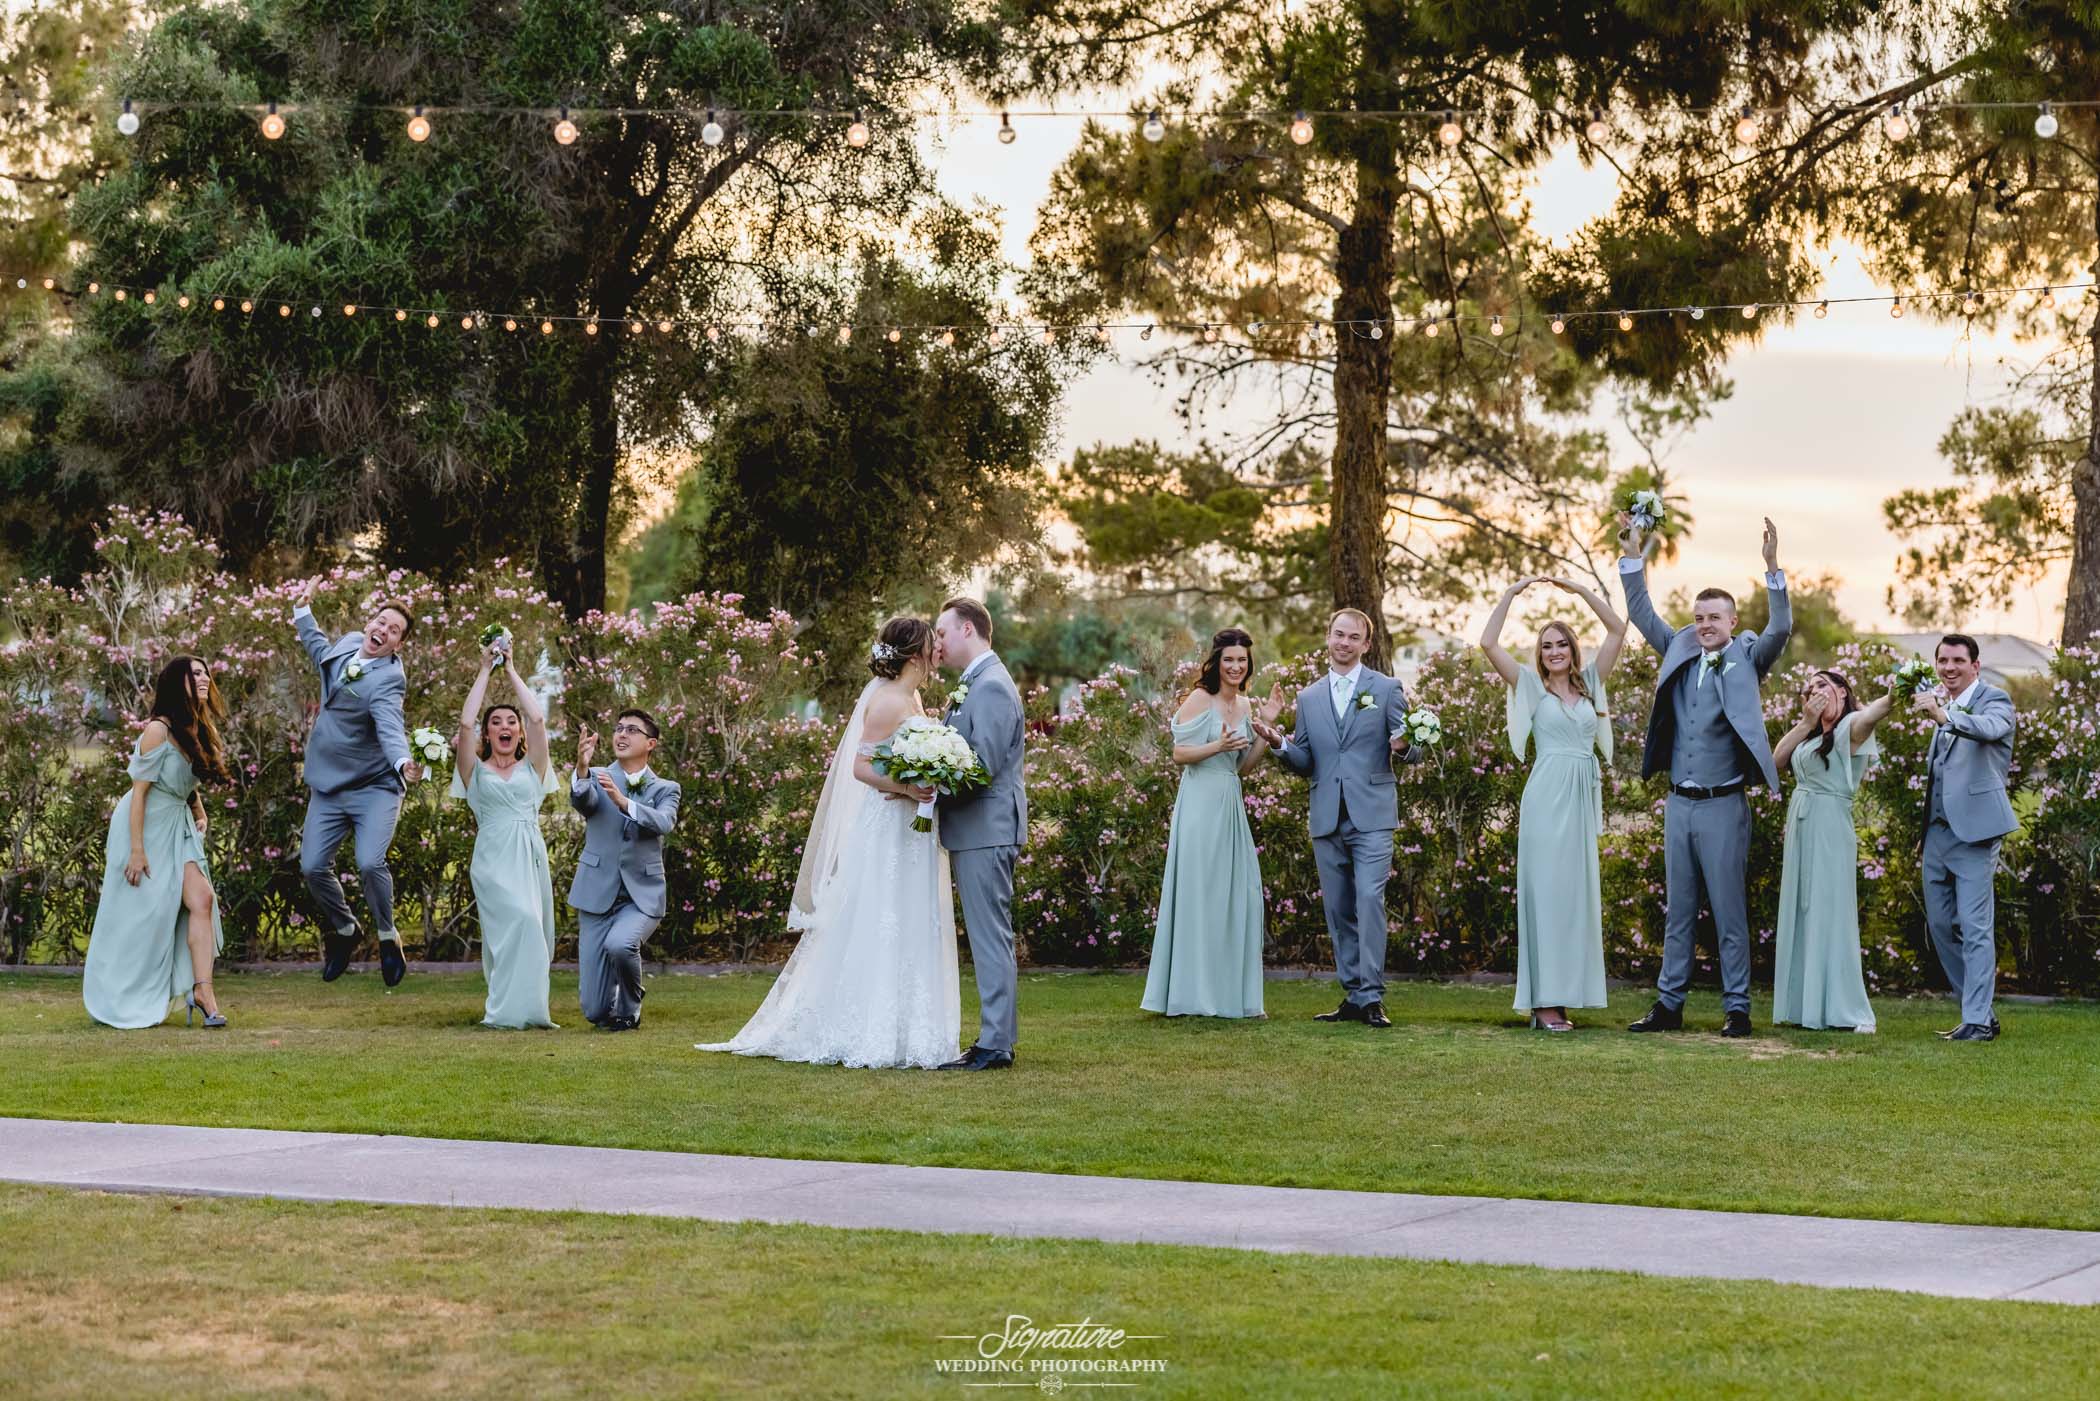 Bride and groom kissing while wedding party does funny poses